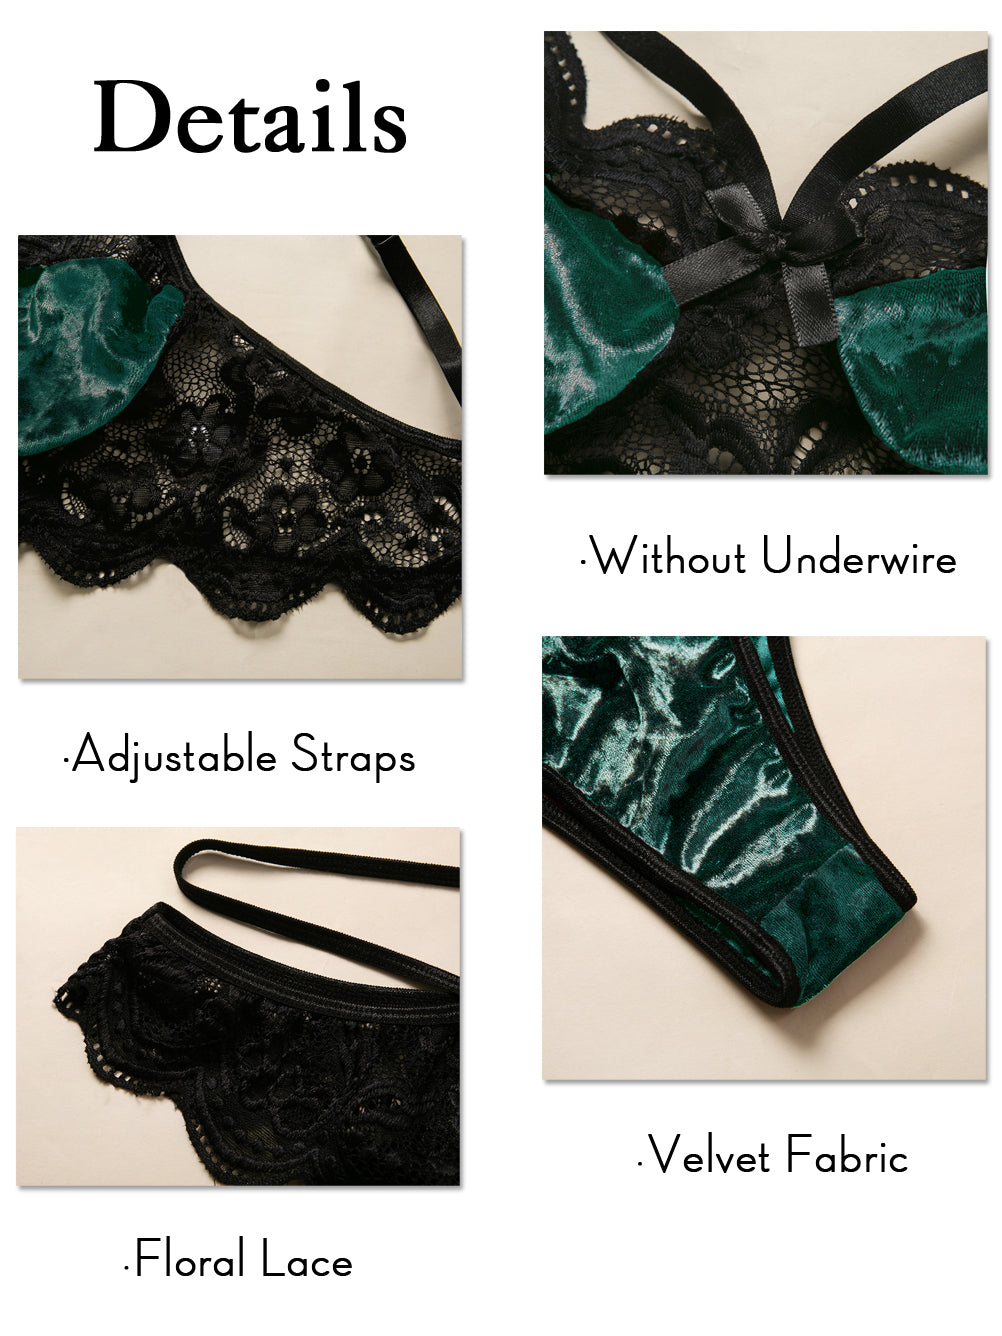  Kaei&Shi Sexy Bra And Panty Sets,Glow In The Dark Blacklight  Choker Cutout Strappy Exotic Lingerie For Women,Underwire Thong Valentines  Day Matching 4 Piece Sexy Lingerie Set Boudoir Dark Green Small: Clothing